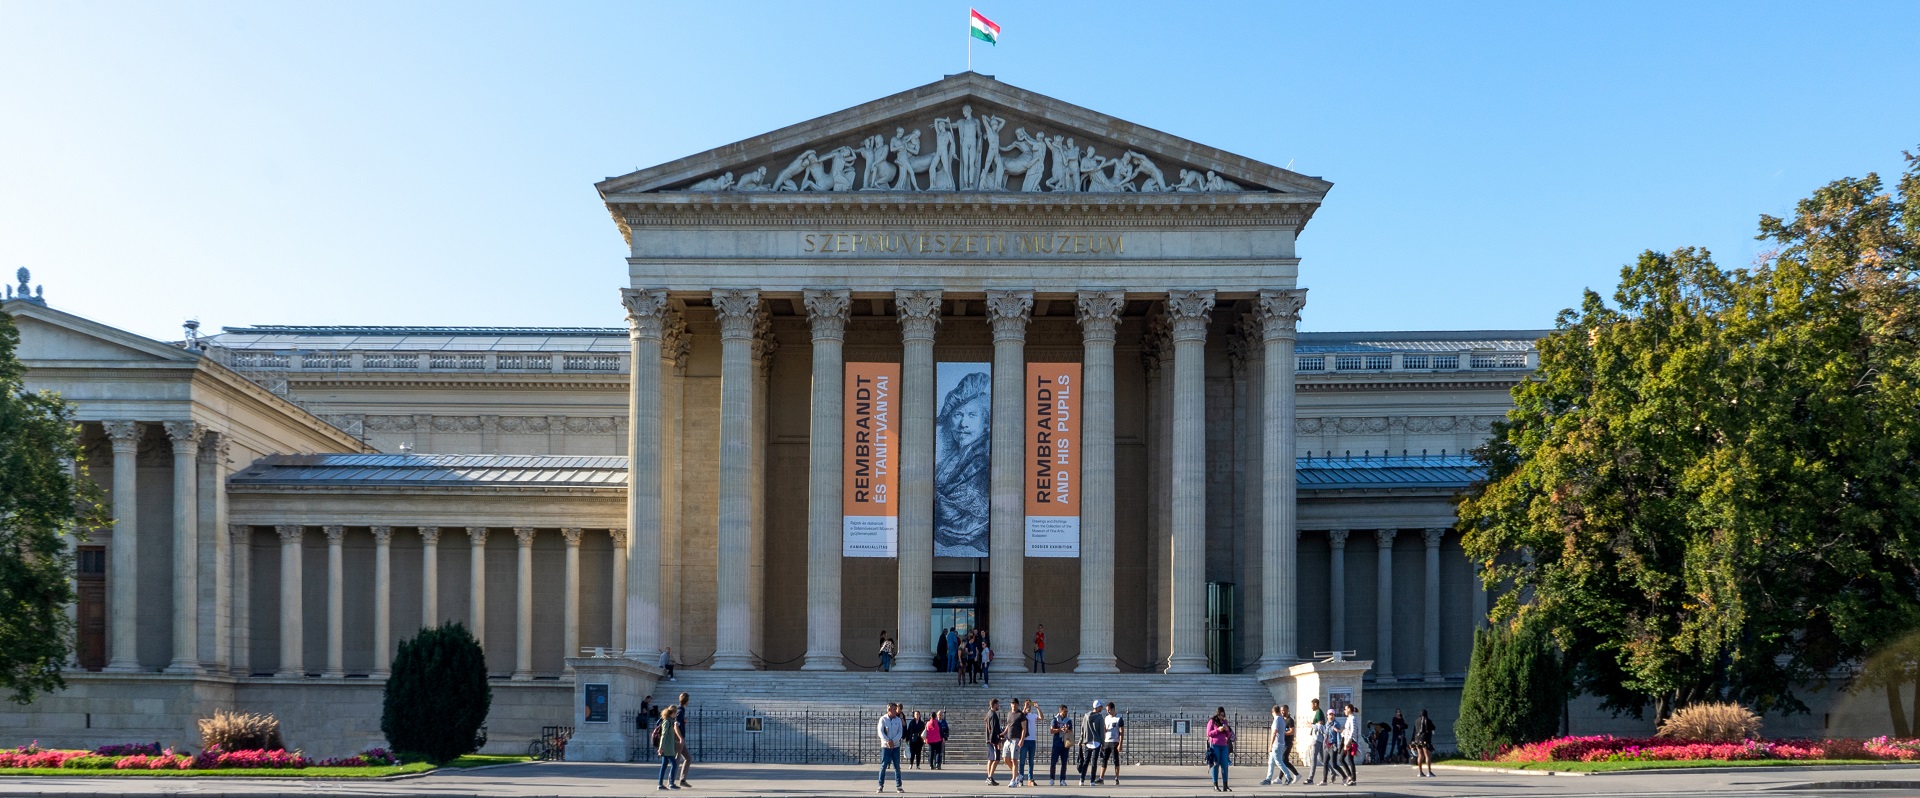  The exterior of Museum of Fine Arts at Heroes’ Square, Budapest